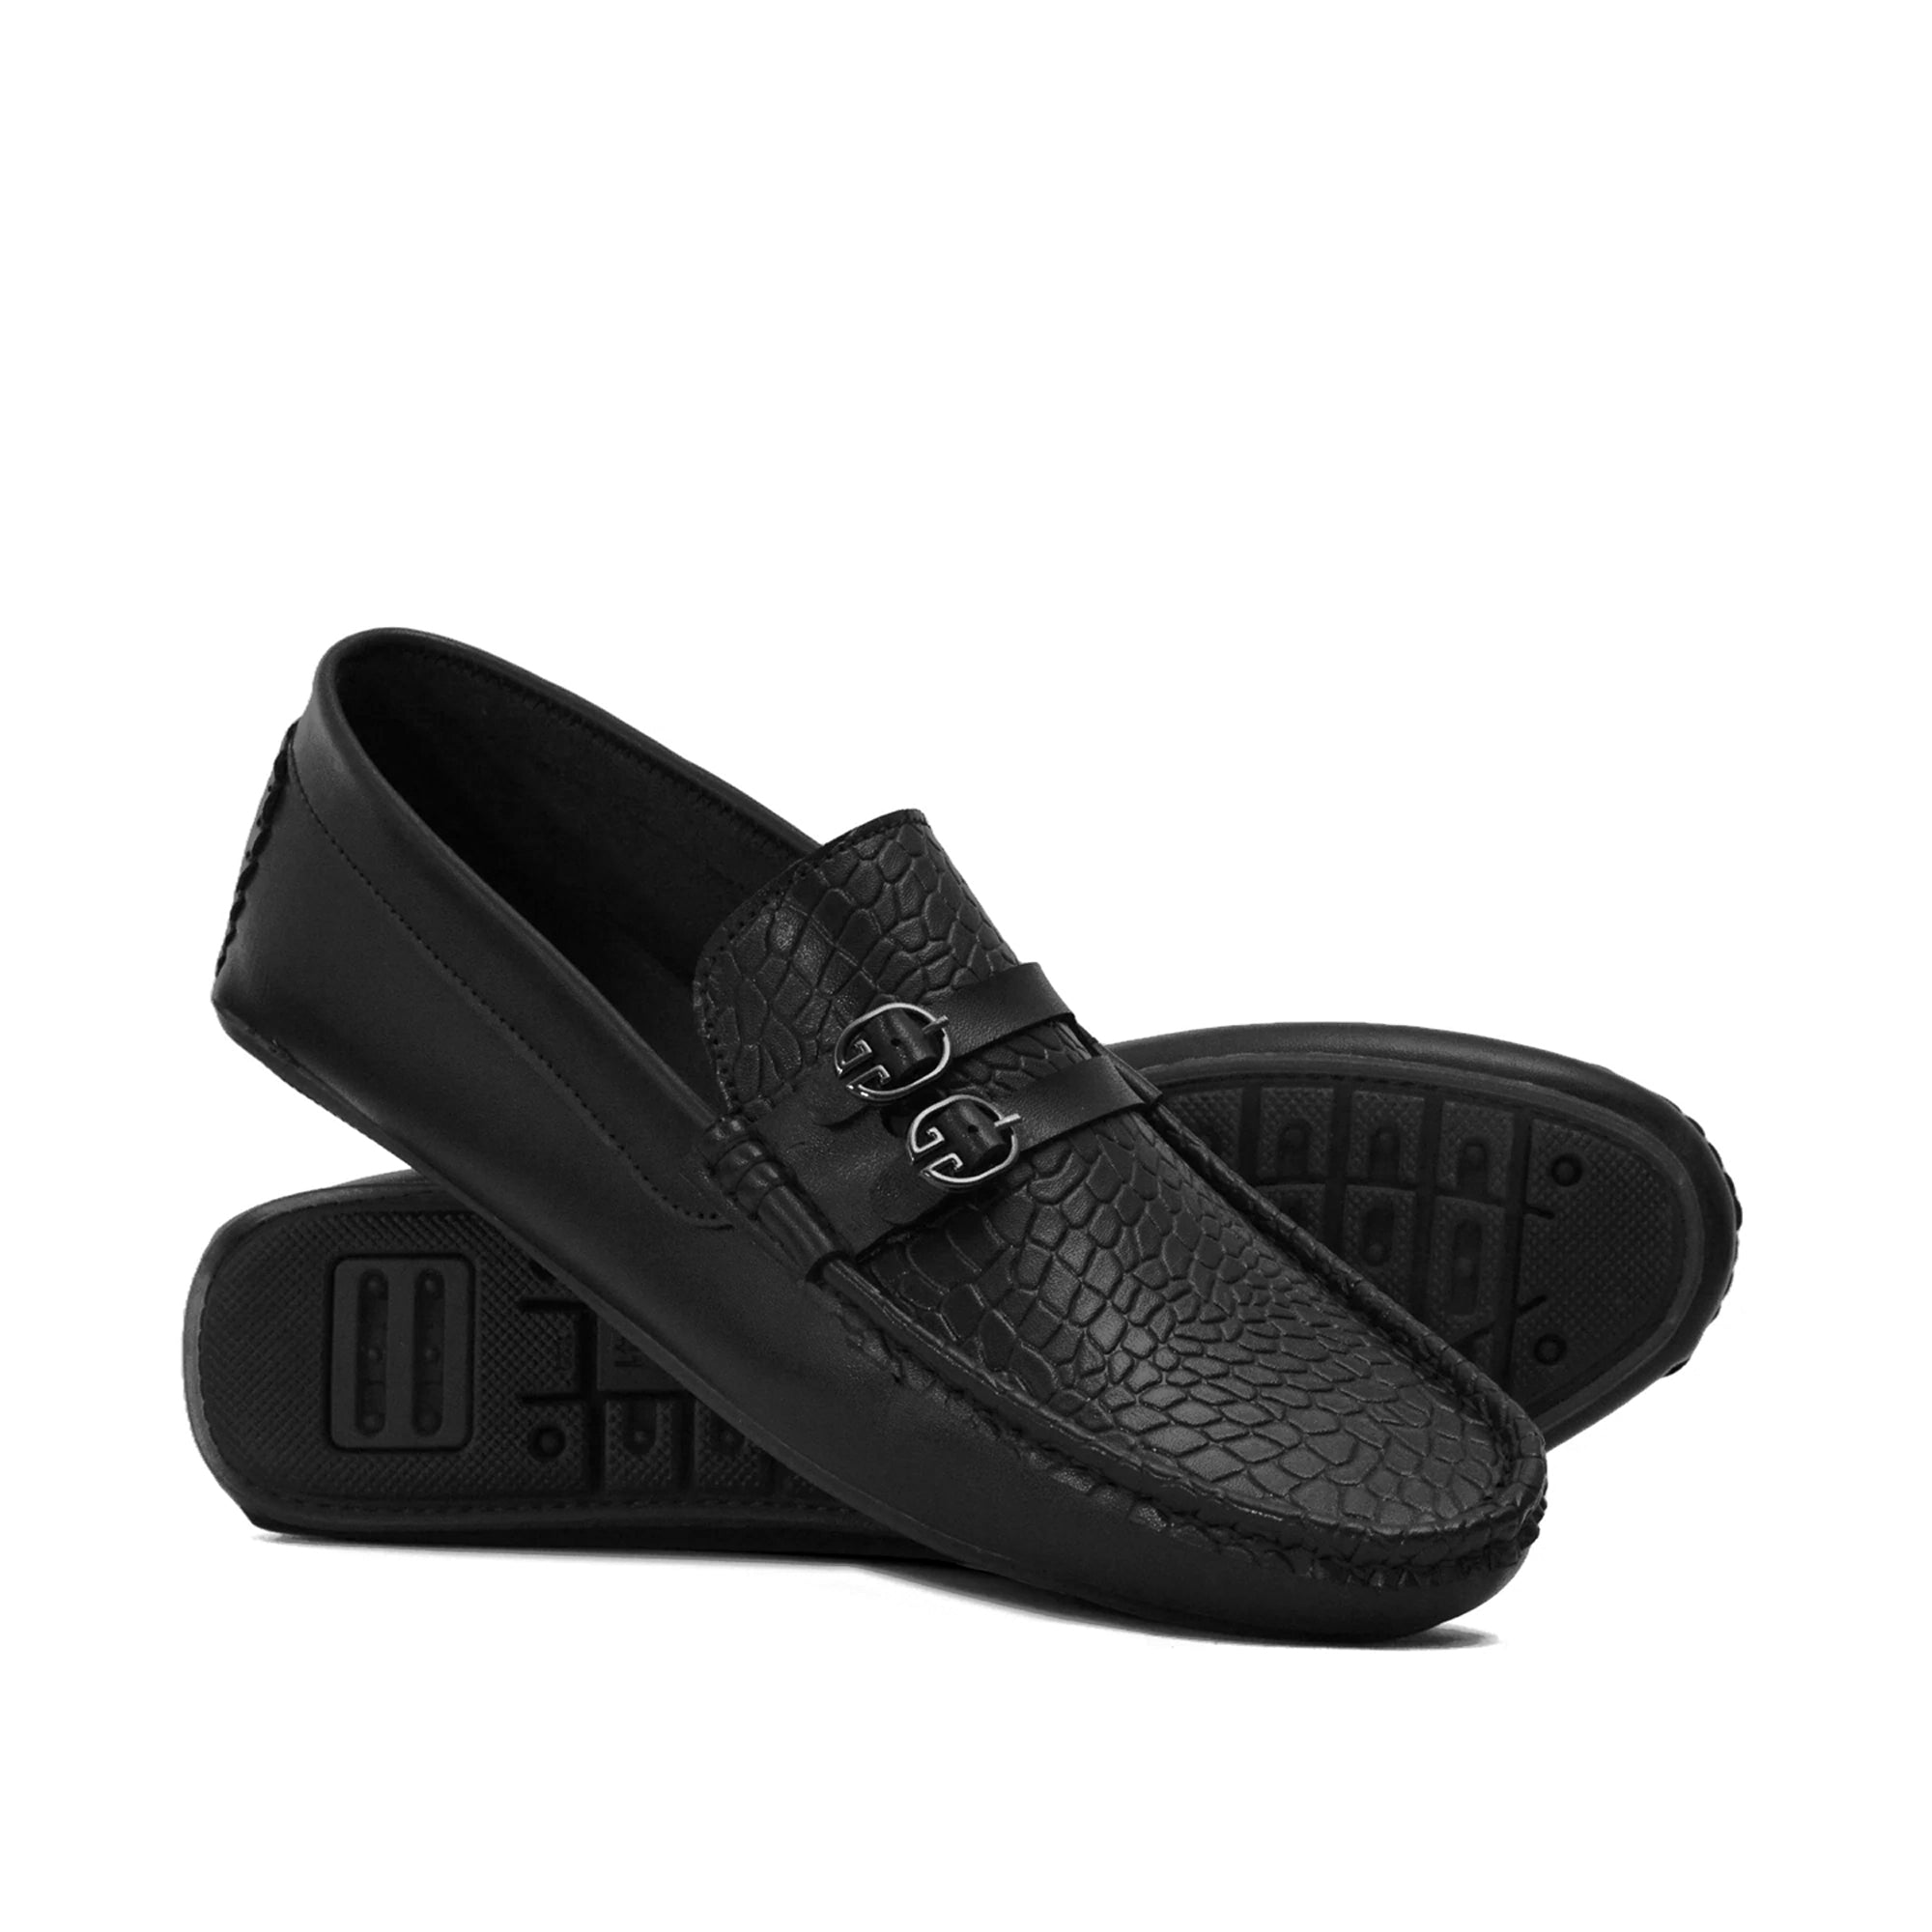 Black Buckle Crafted Loafer LS05